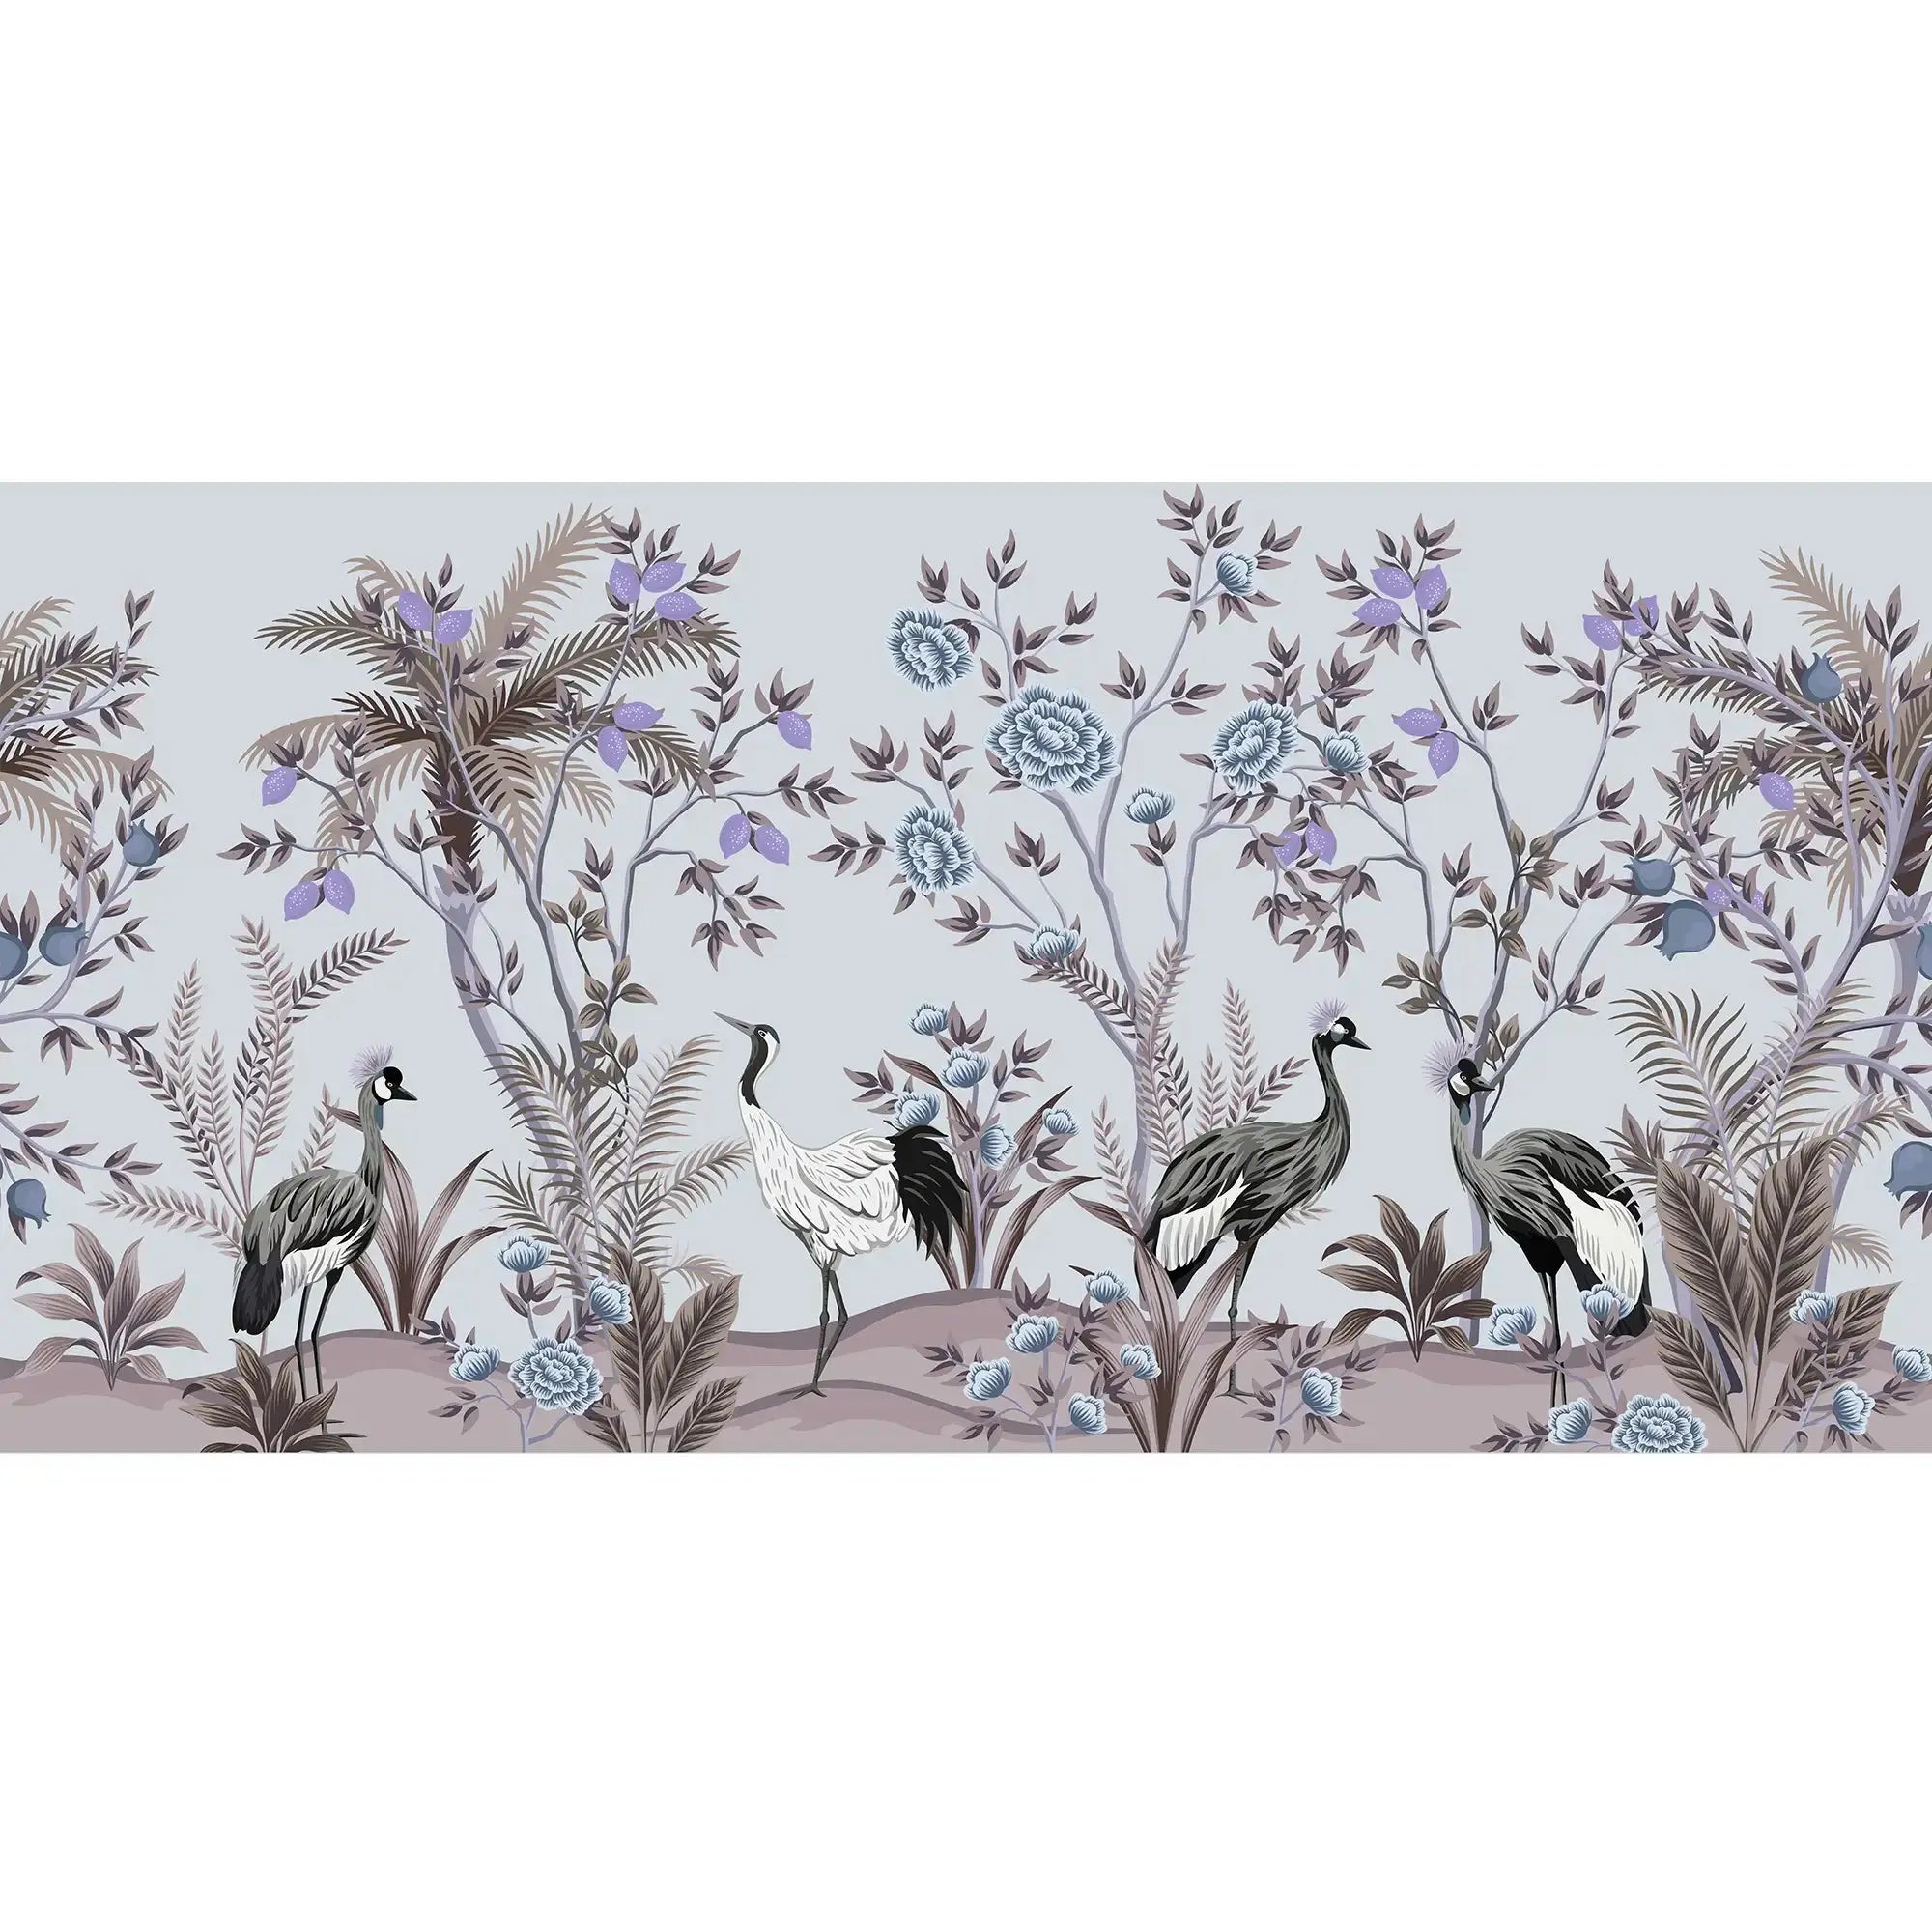 3107-D / Peelable Asian Wallpaper - Oriental Style with Cranes and Flowers - Easy Install Wall Mural - Artevella